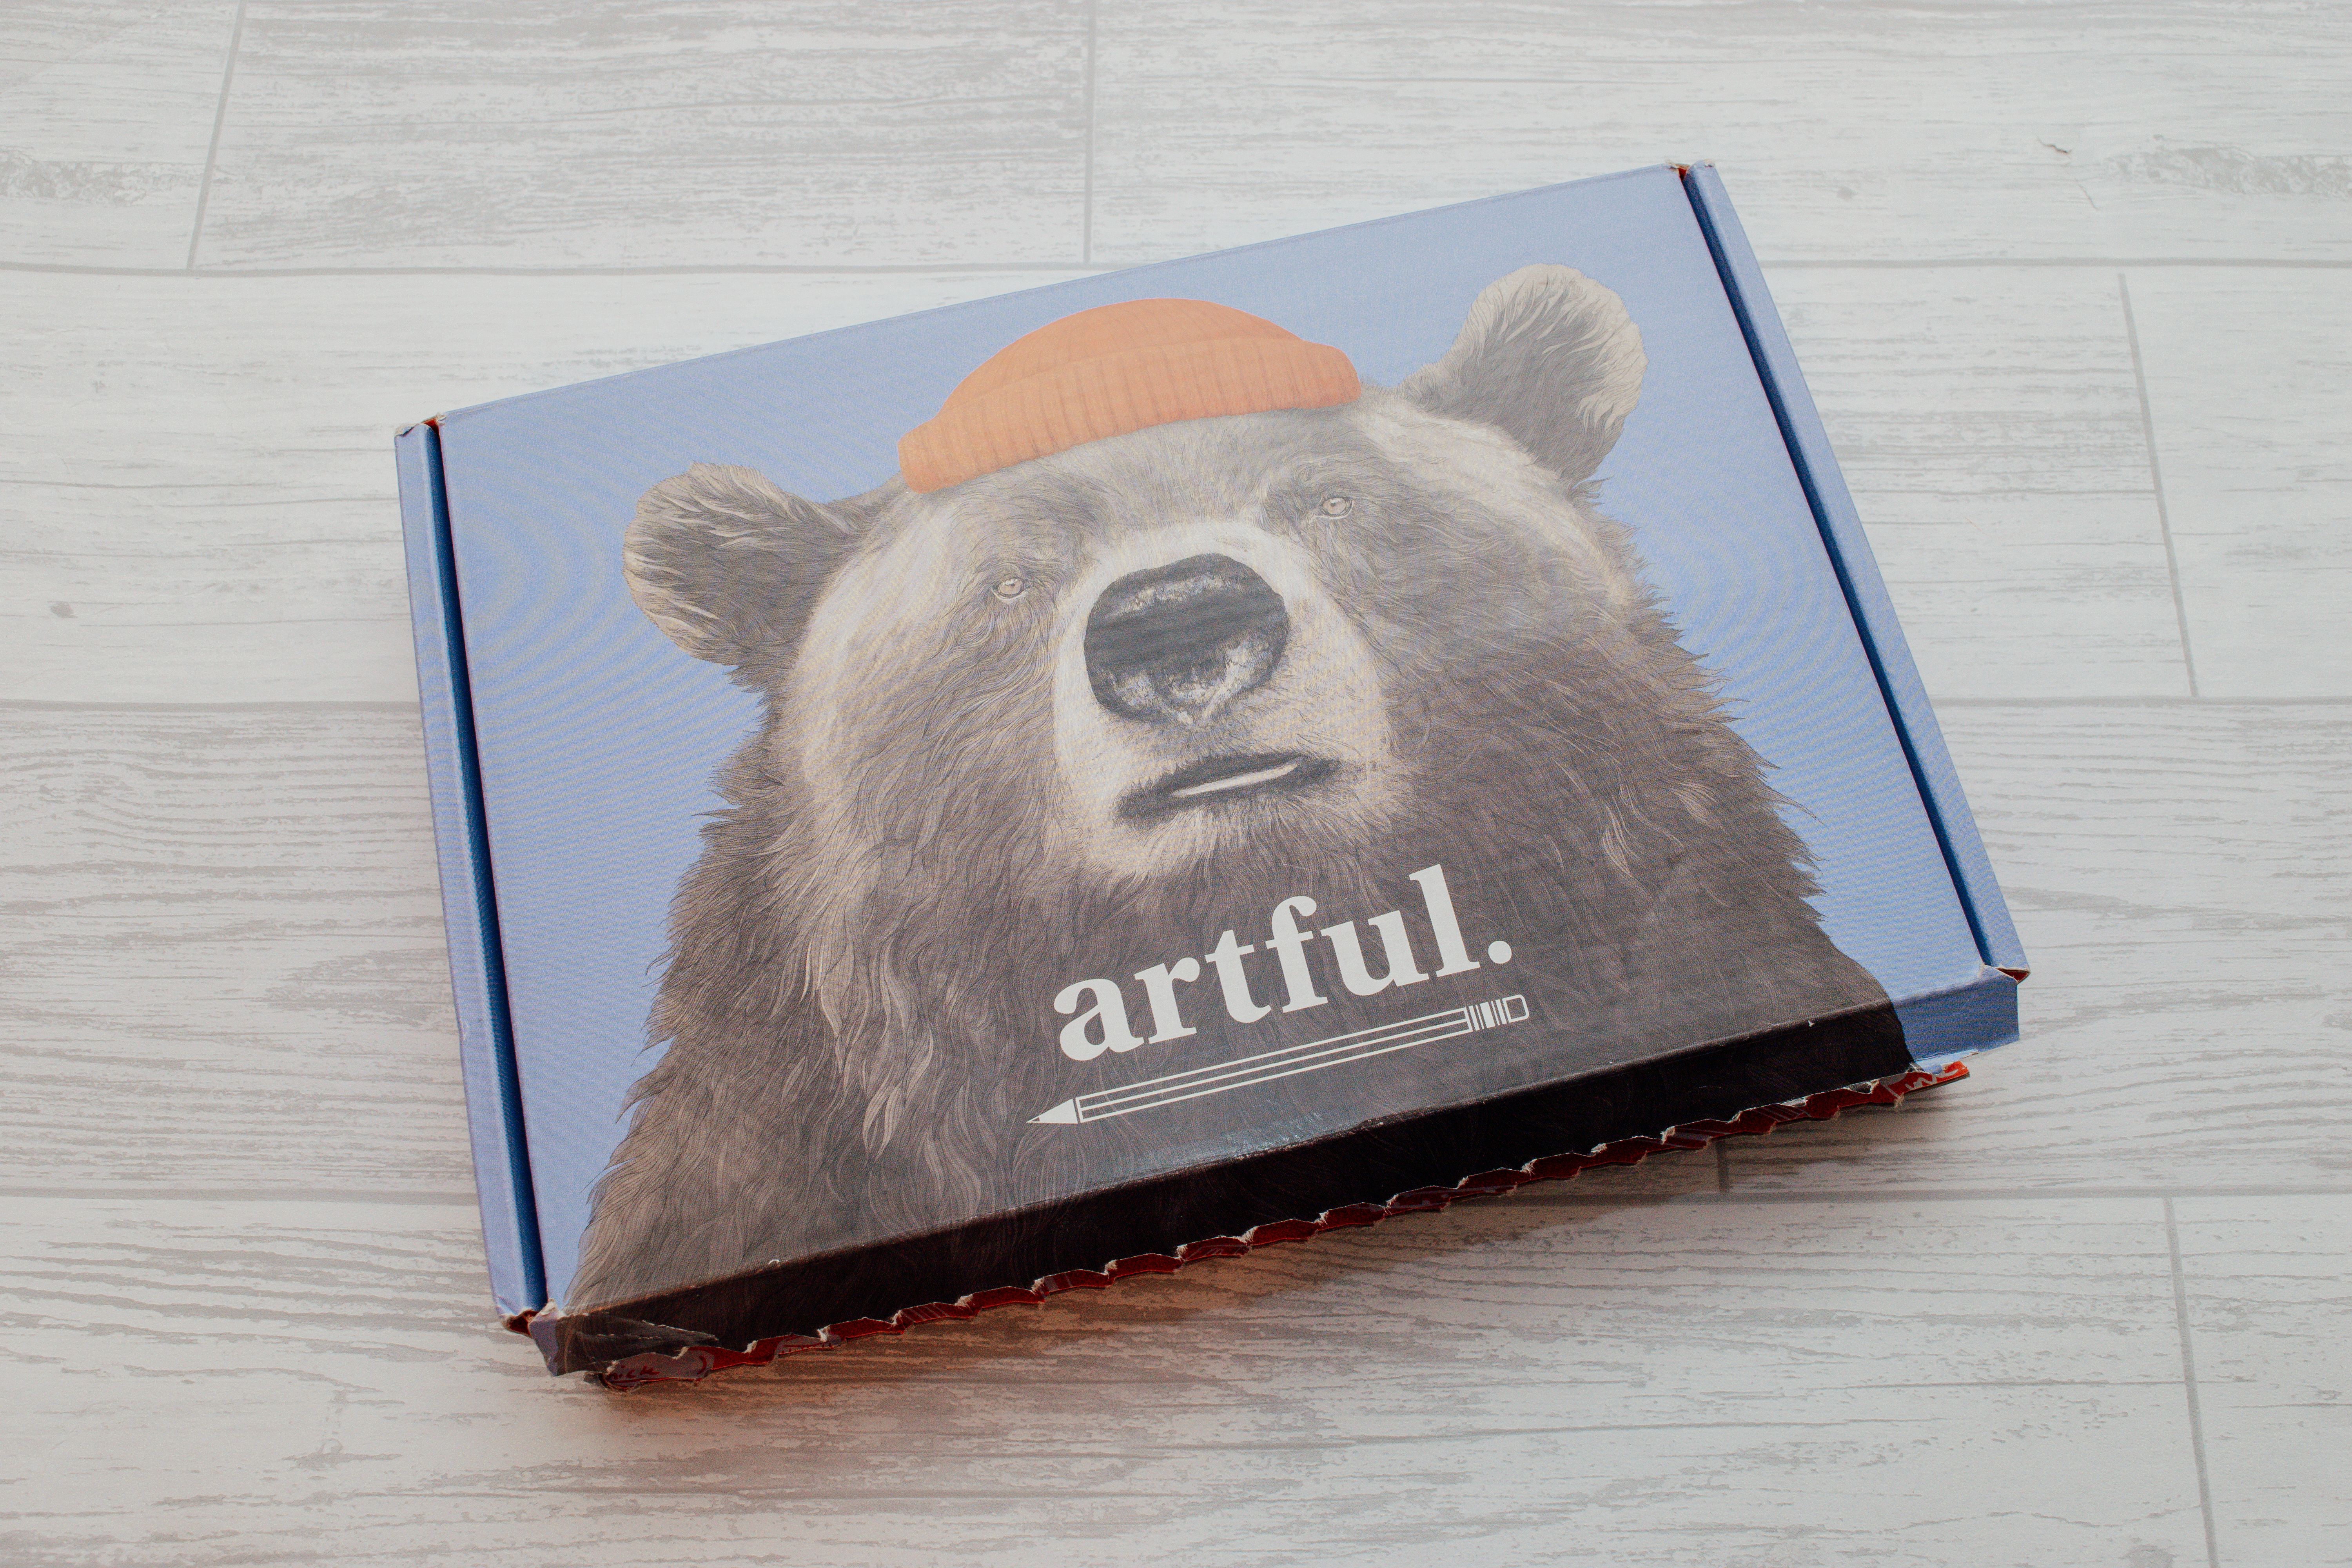 Blue box with a brown bear on the front